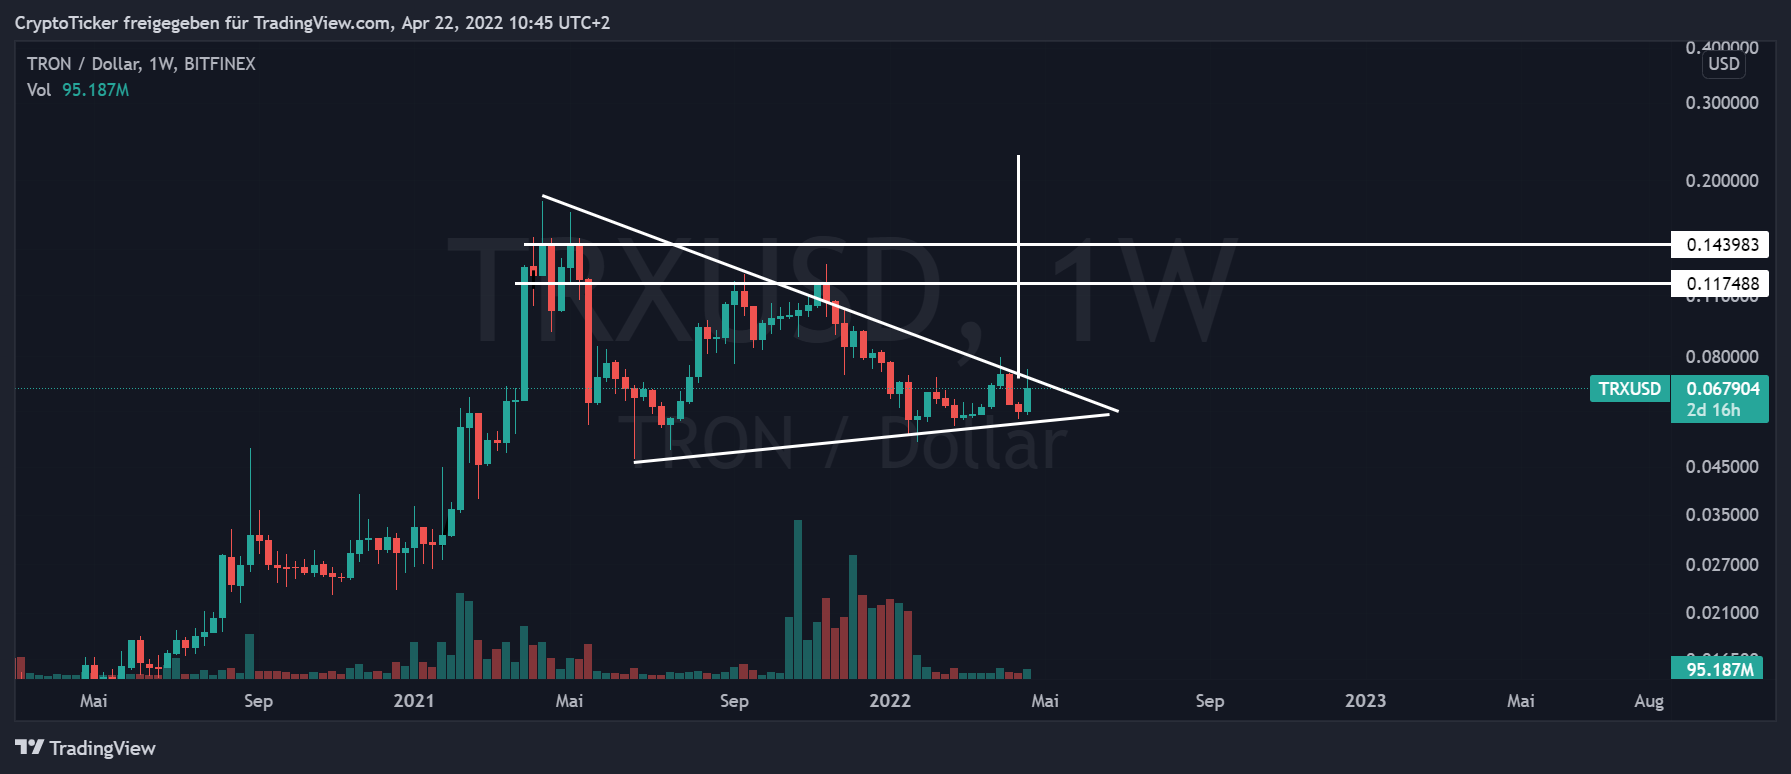 Tron price prediction - TRX/USD 1-week chart showing the potential target of TRX